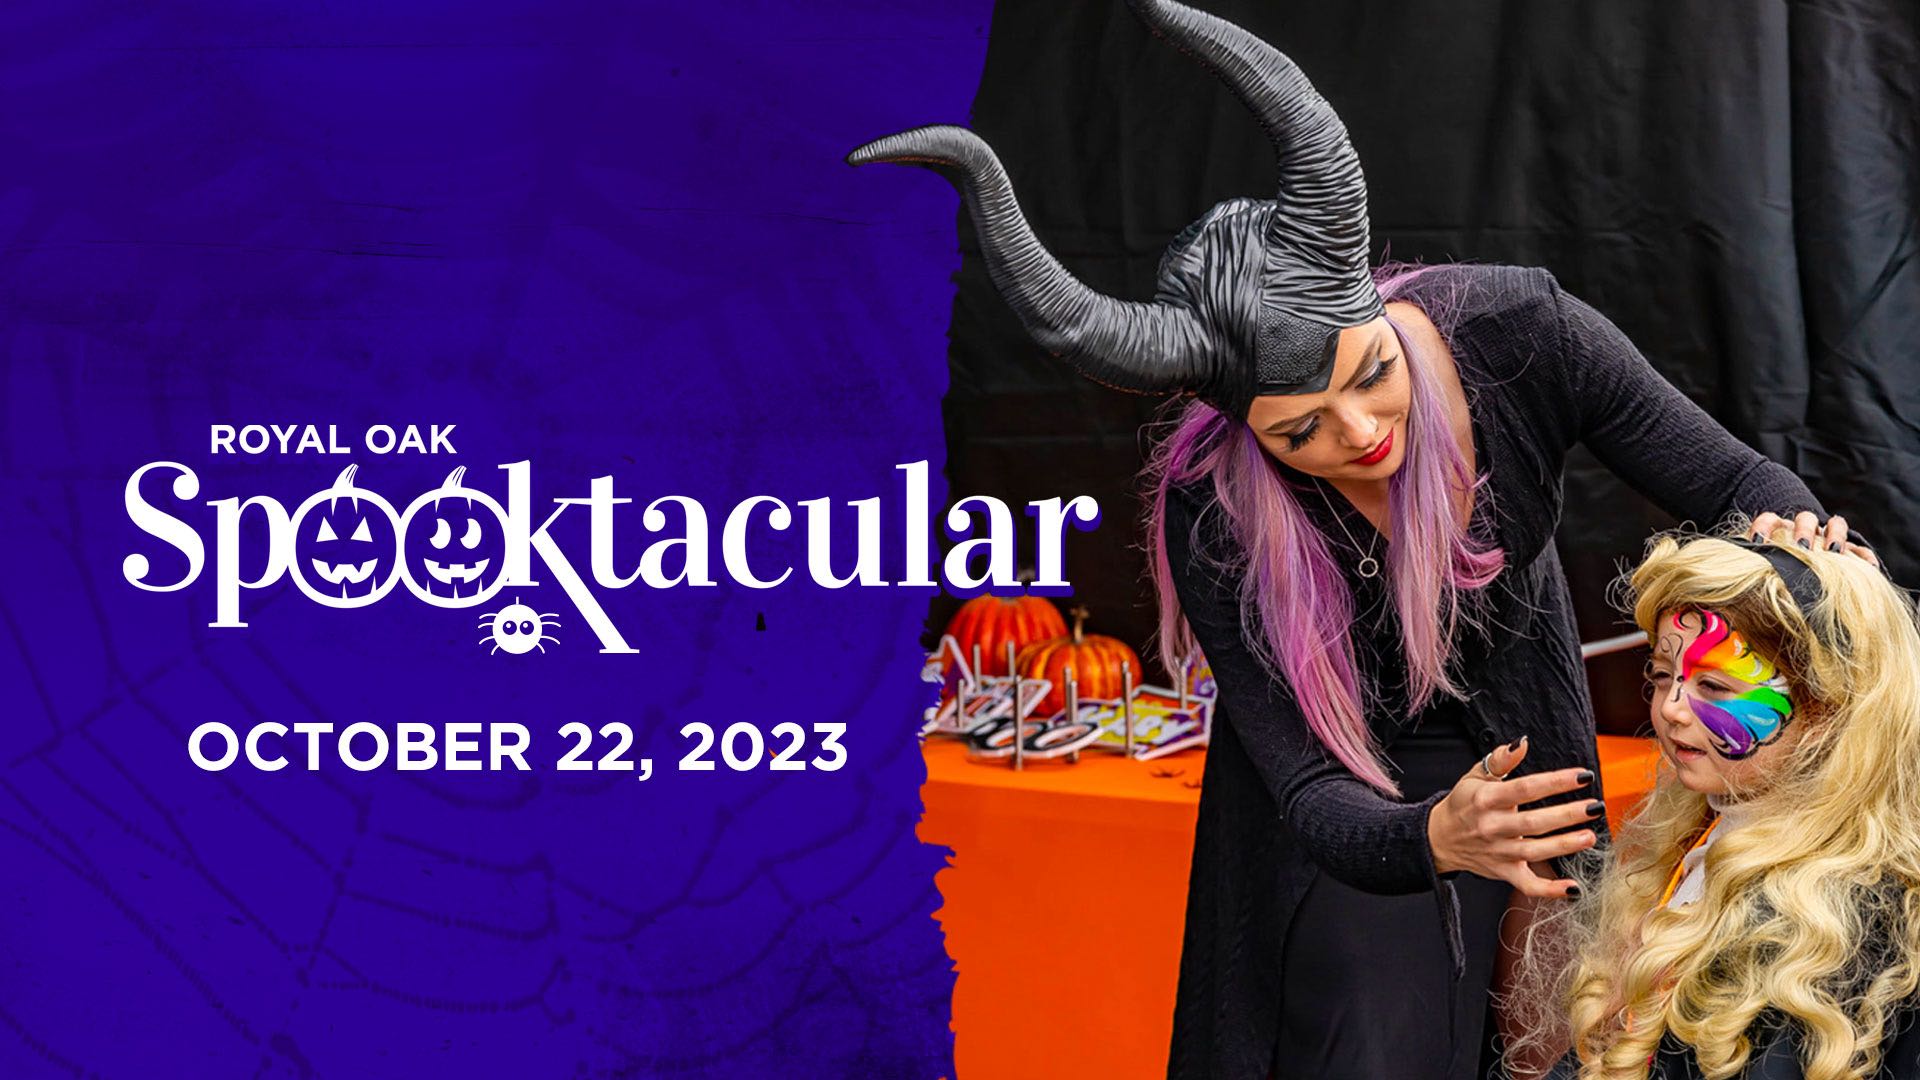 Royal Oak Spooktacular, October 22, 2023. Event logo overlaying image of adult in costume painting face of child